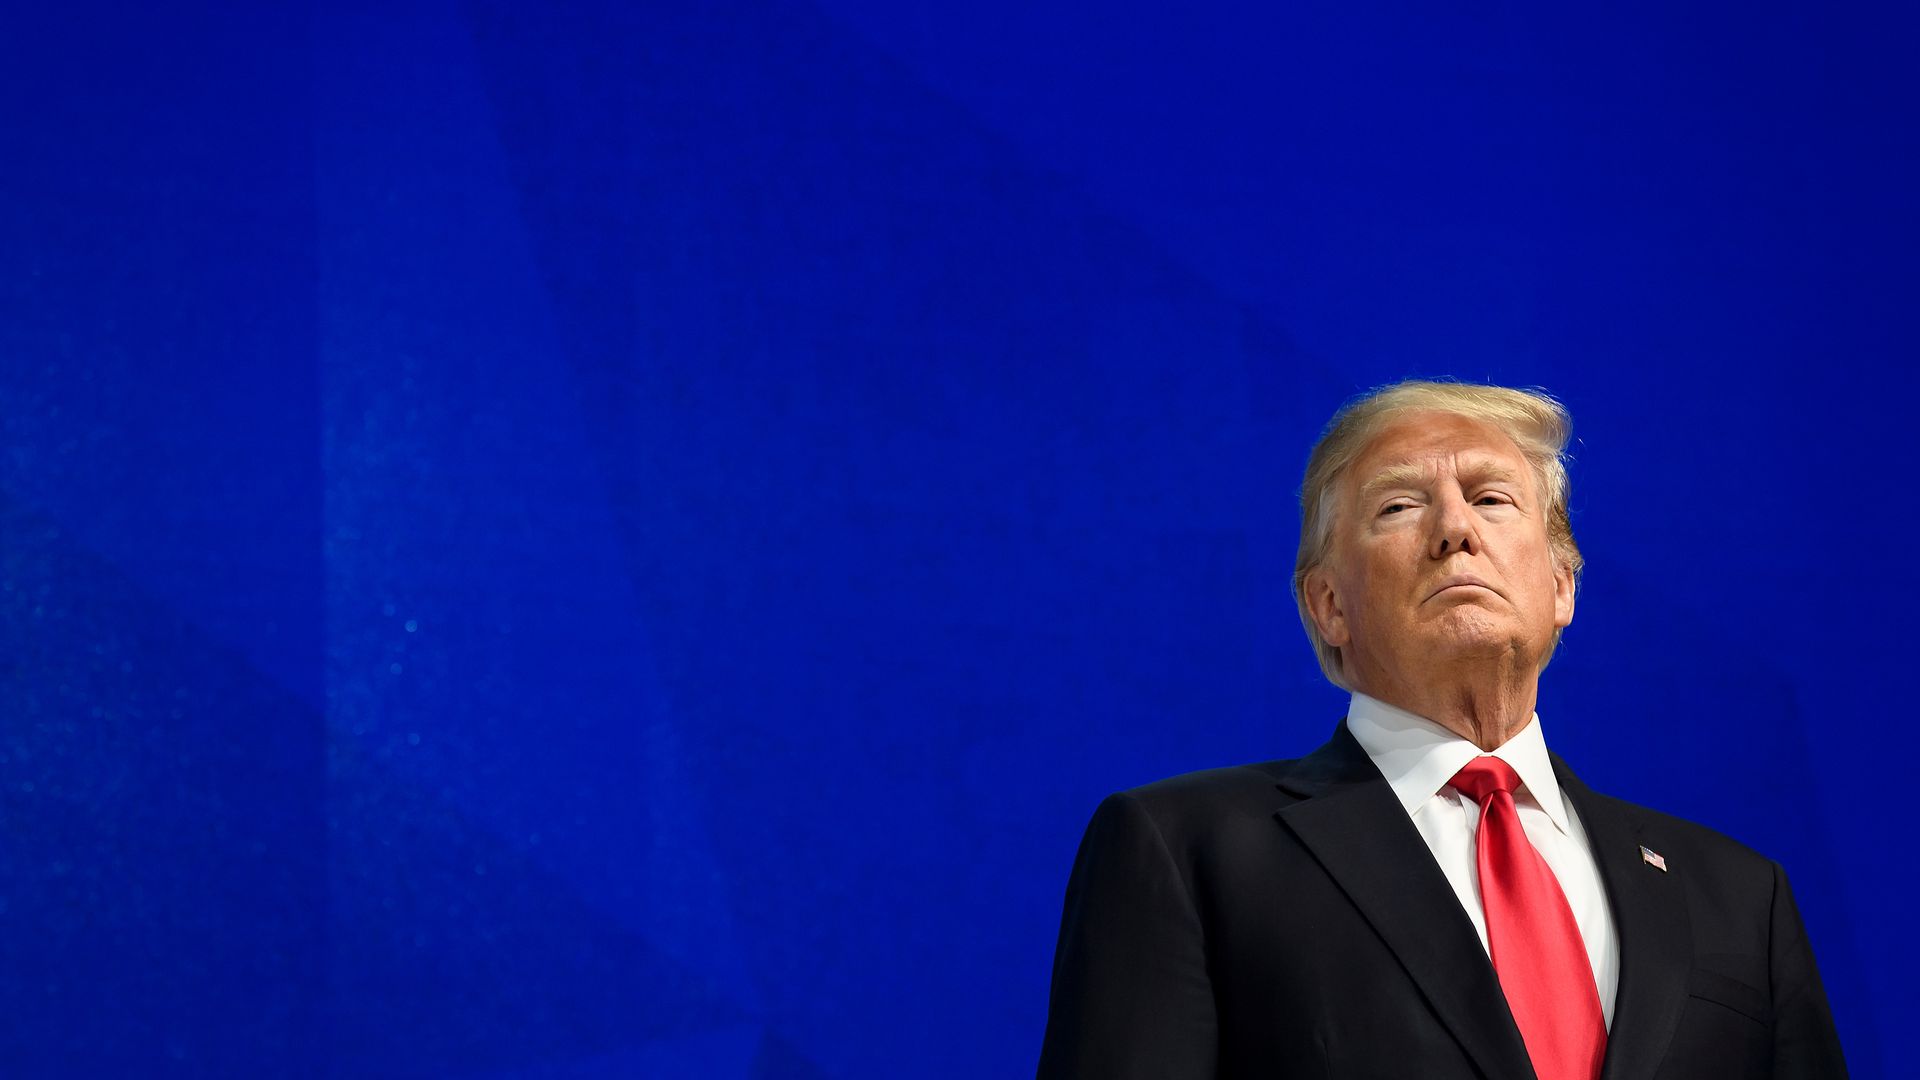 Trump at Davos against a blue background